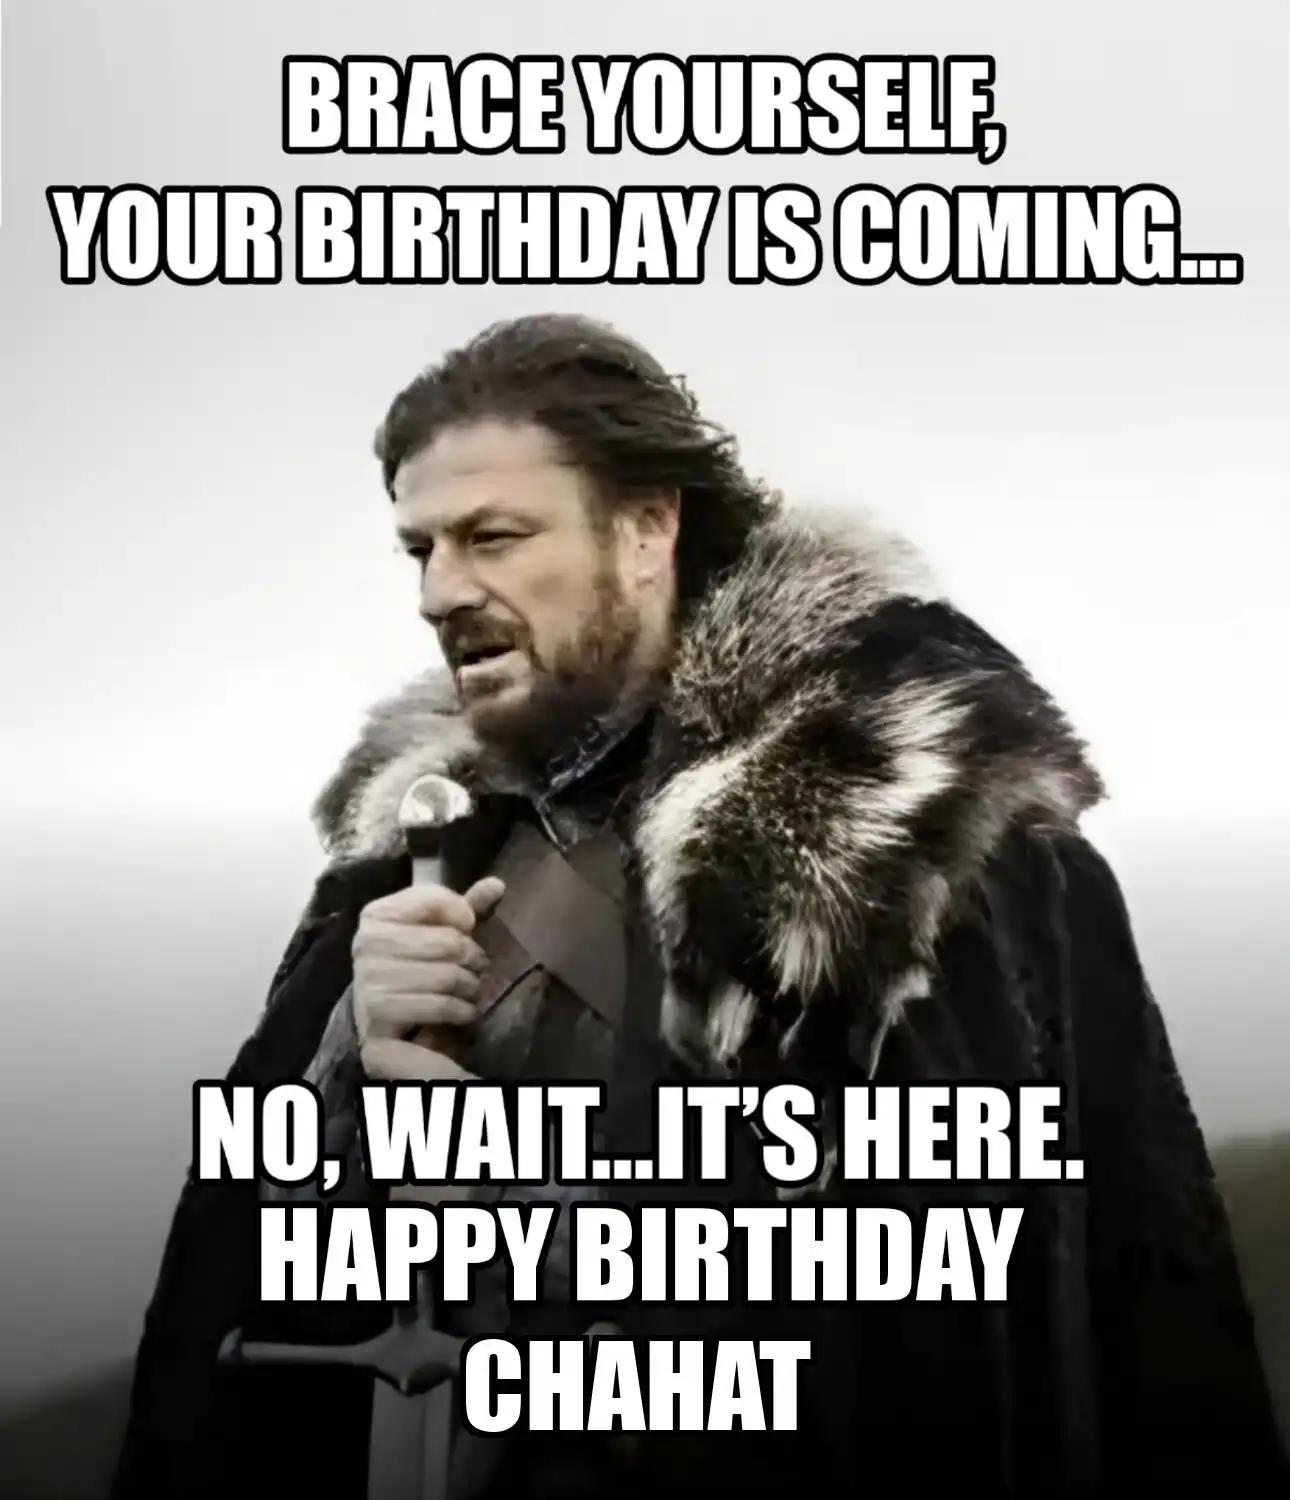 Happy Birthday Chahat Brace Yourself Your Birthday Is Coming Meme